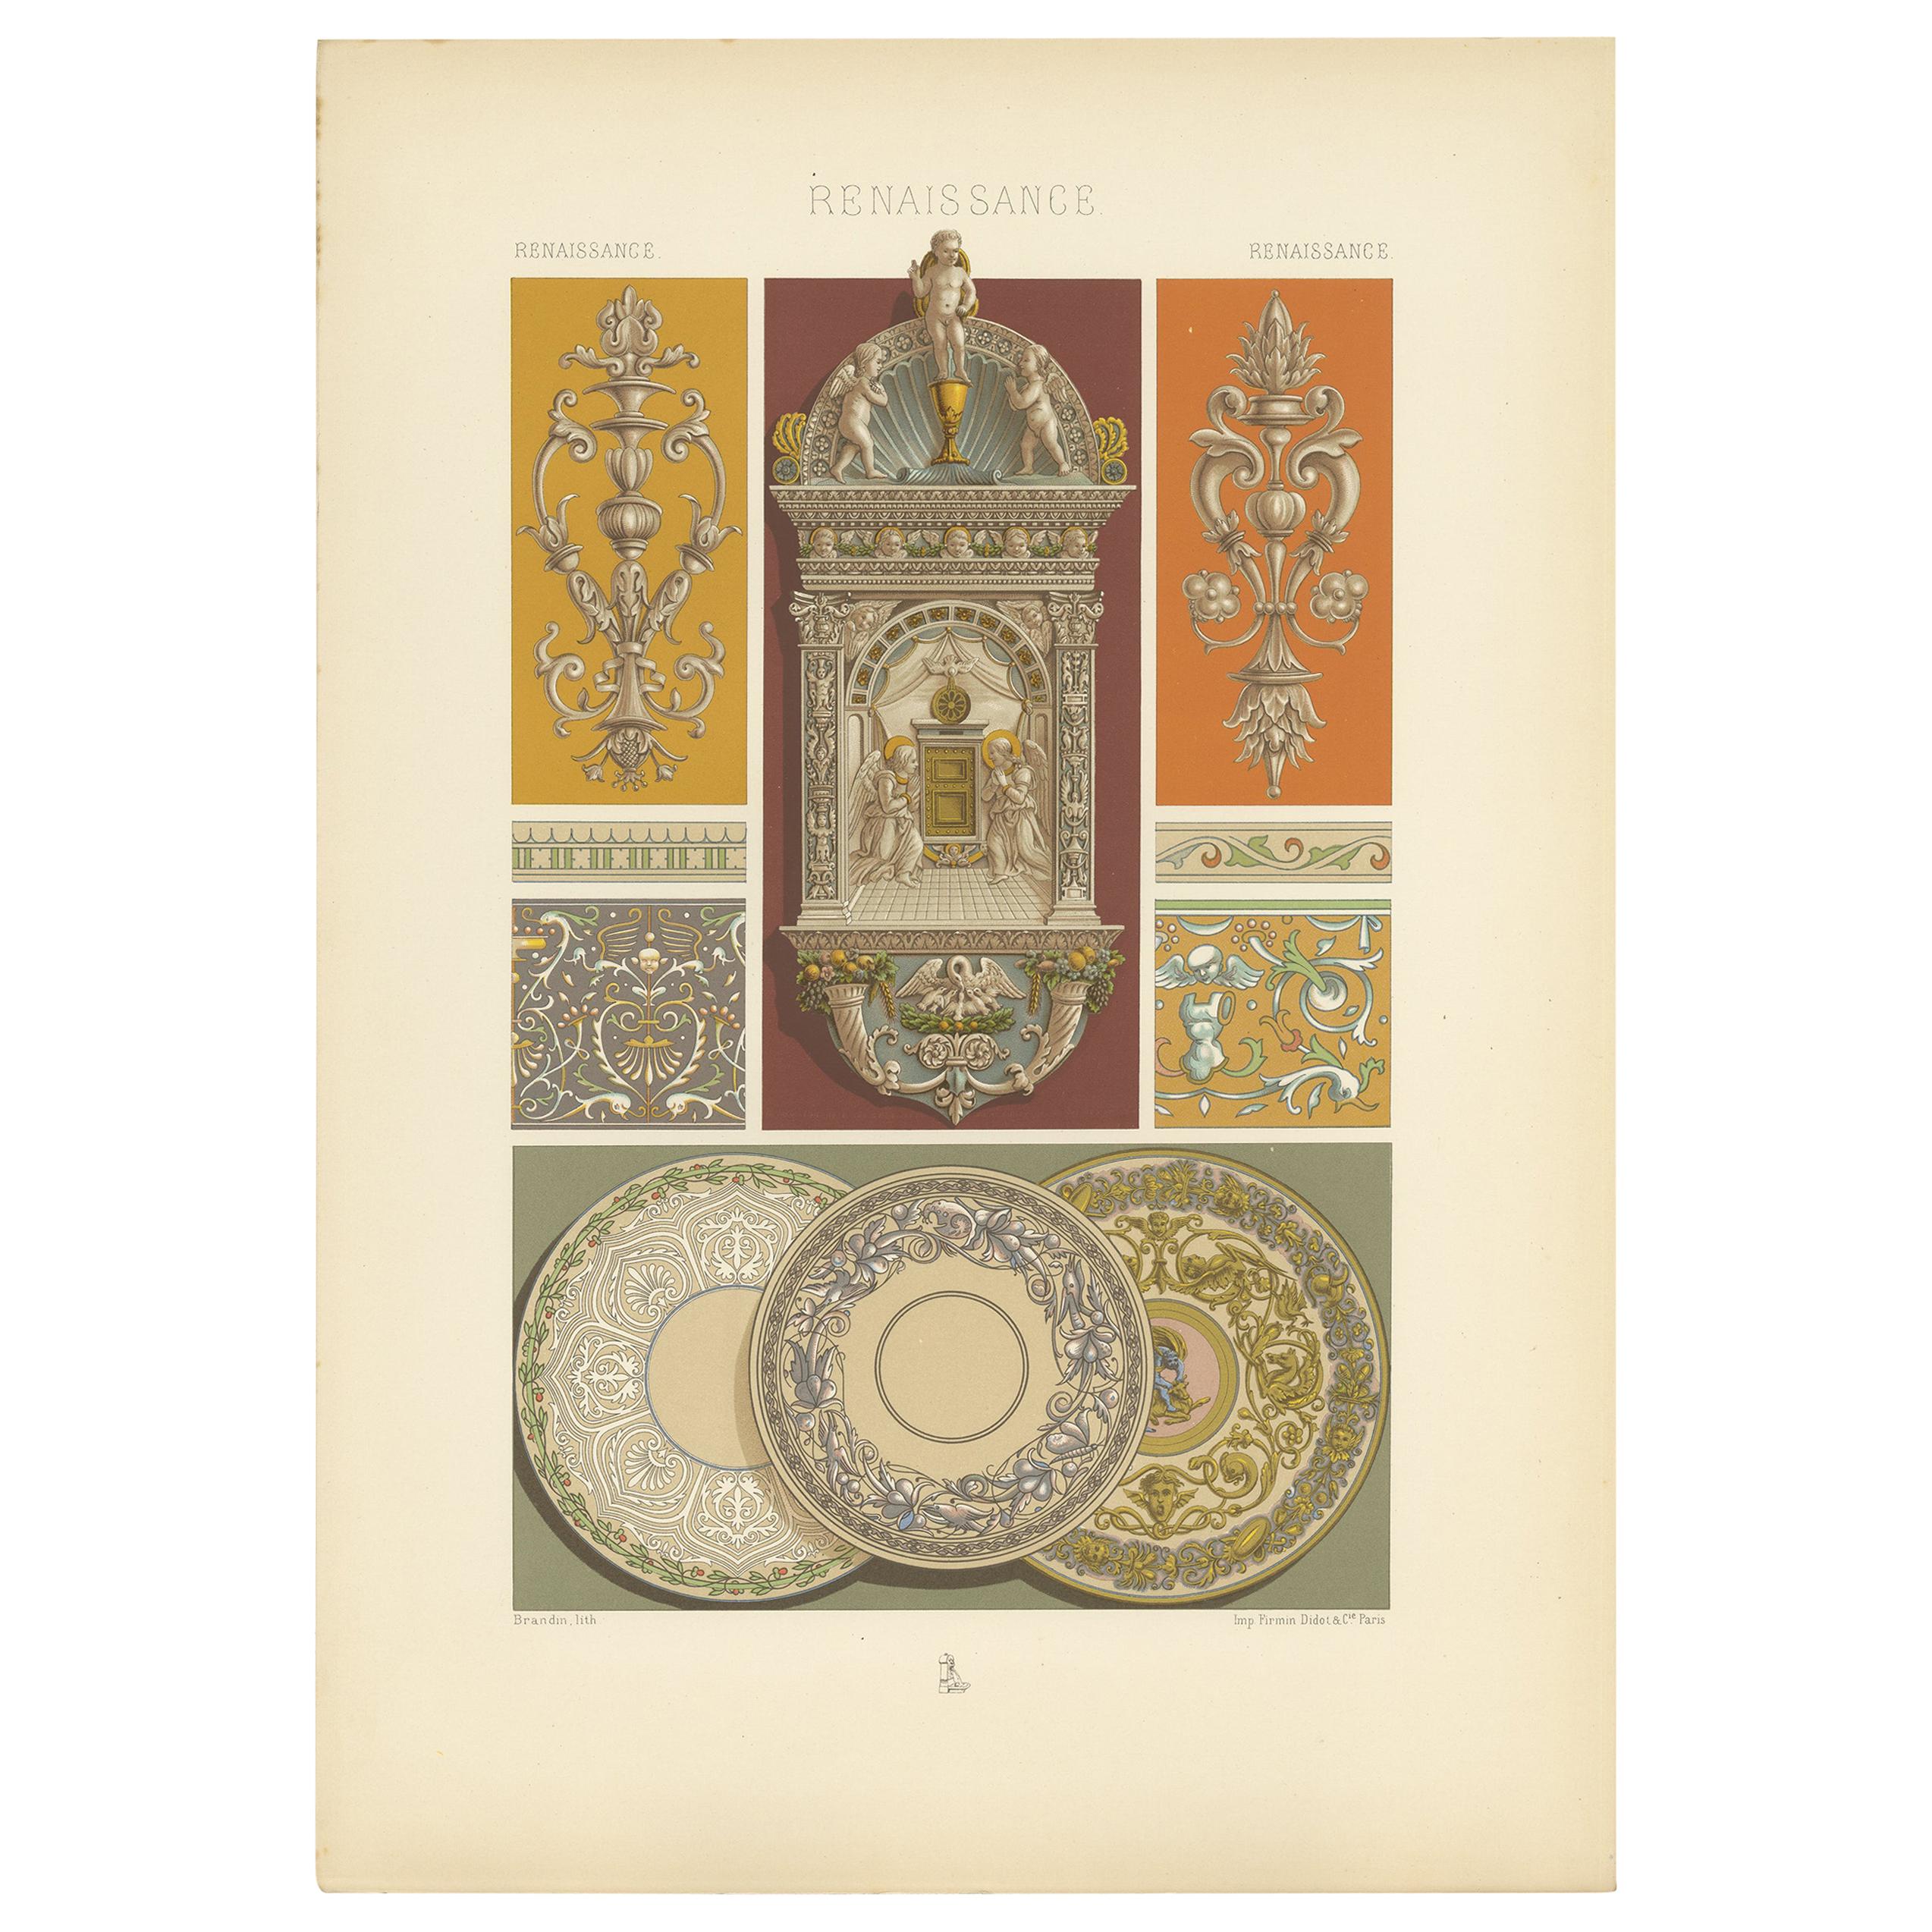 Pl. 88 Print of Renaissance Ceramics and Stained Glass by Racinet, circa 1890